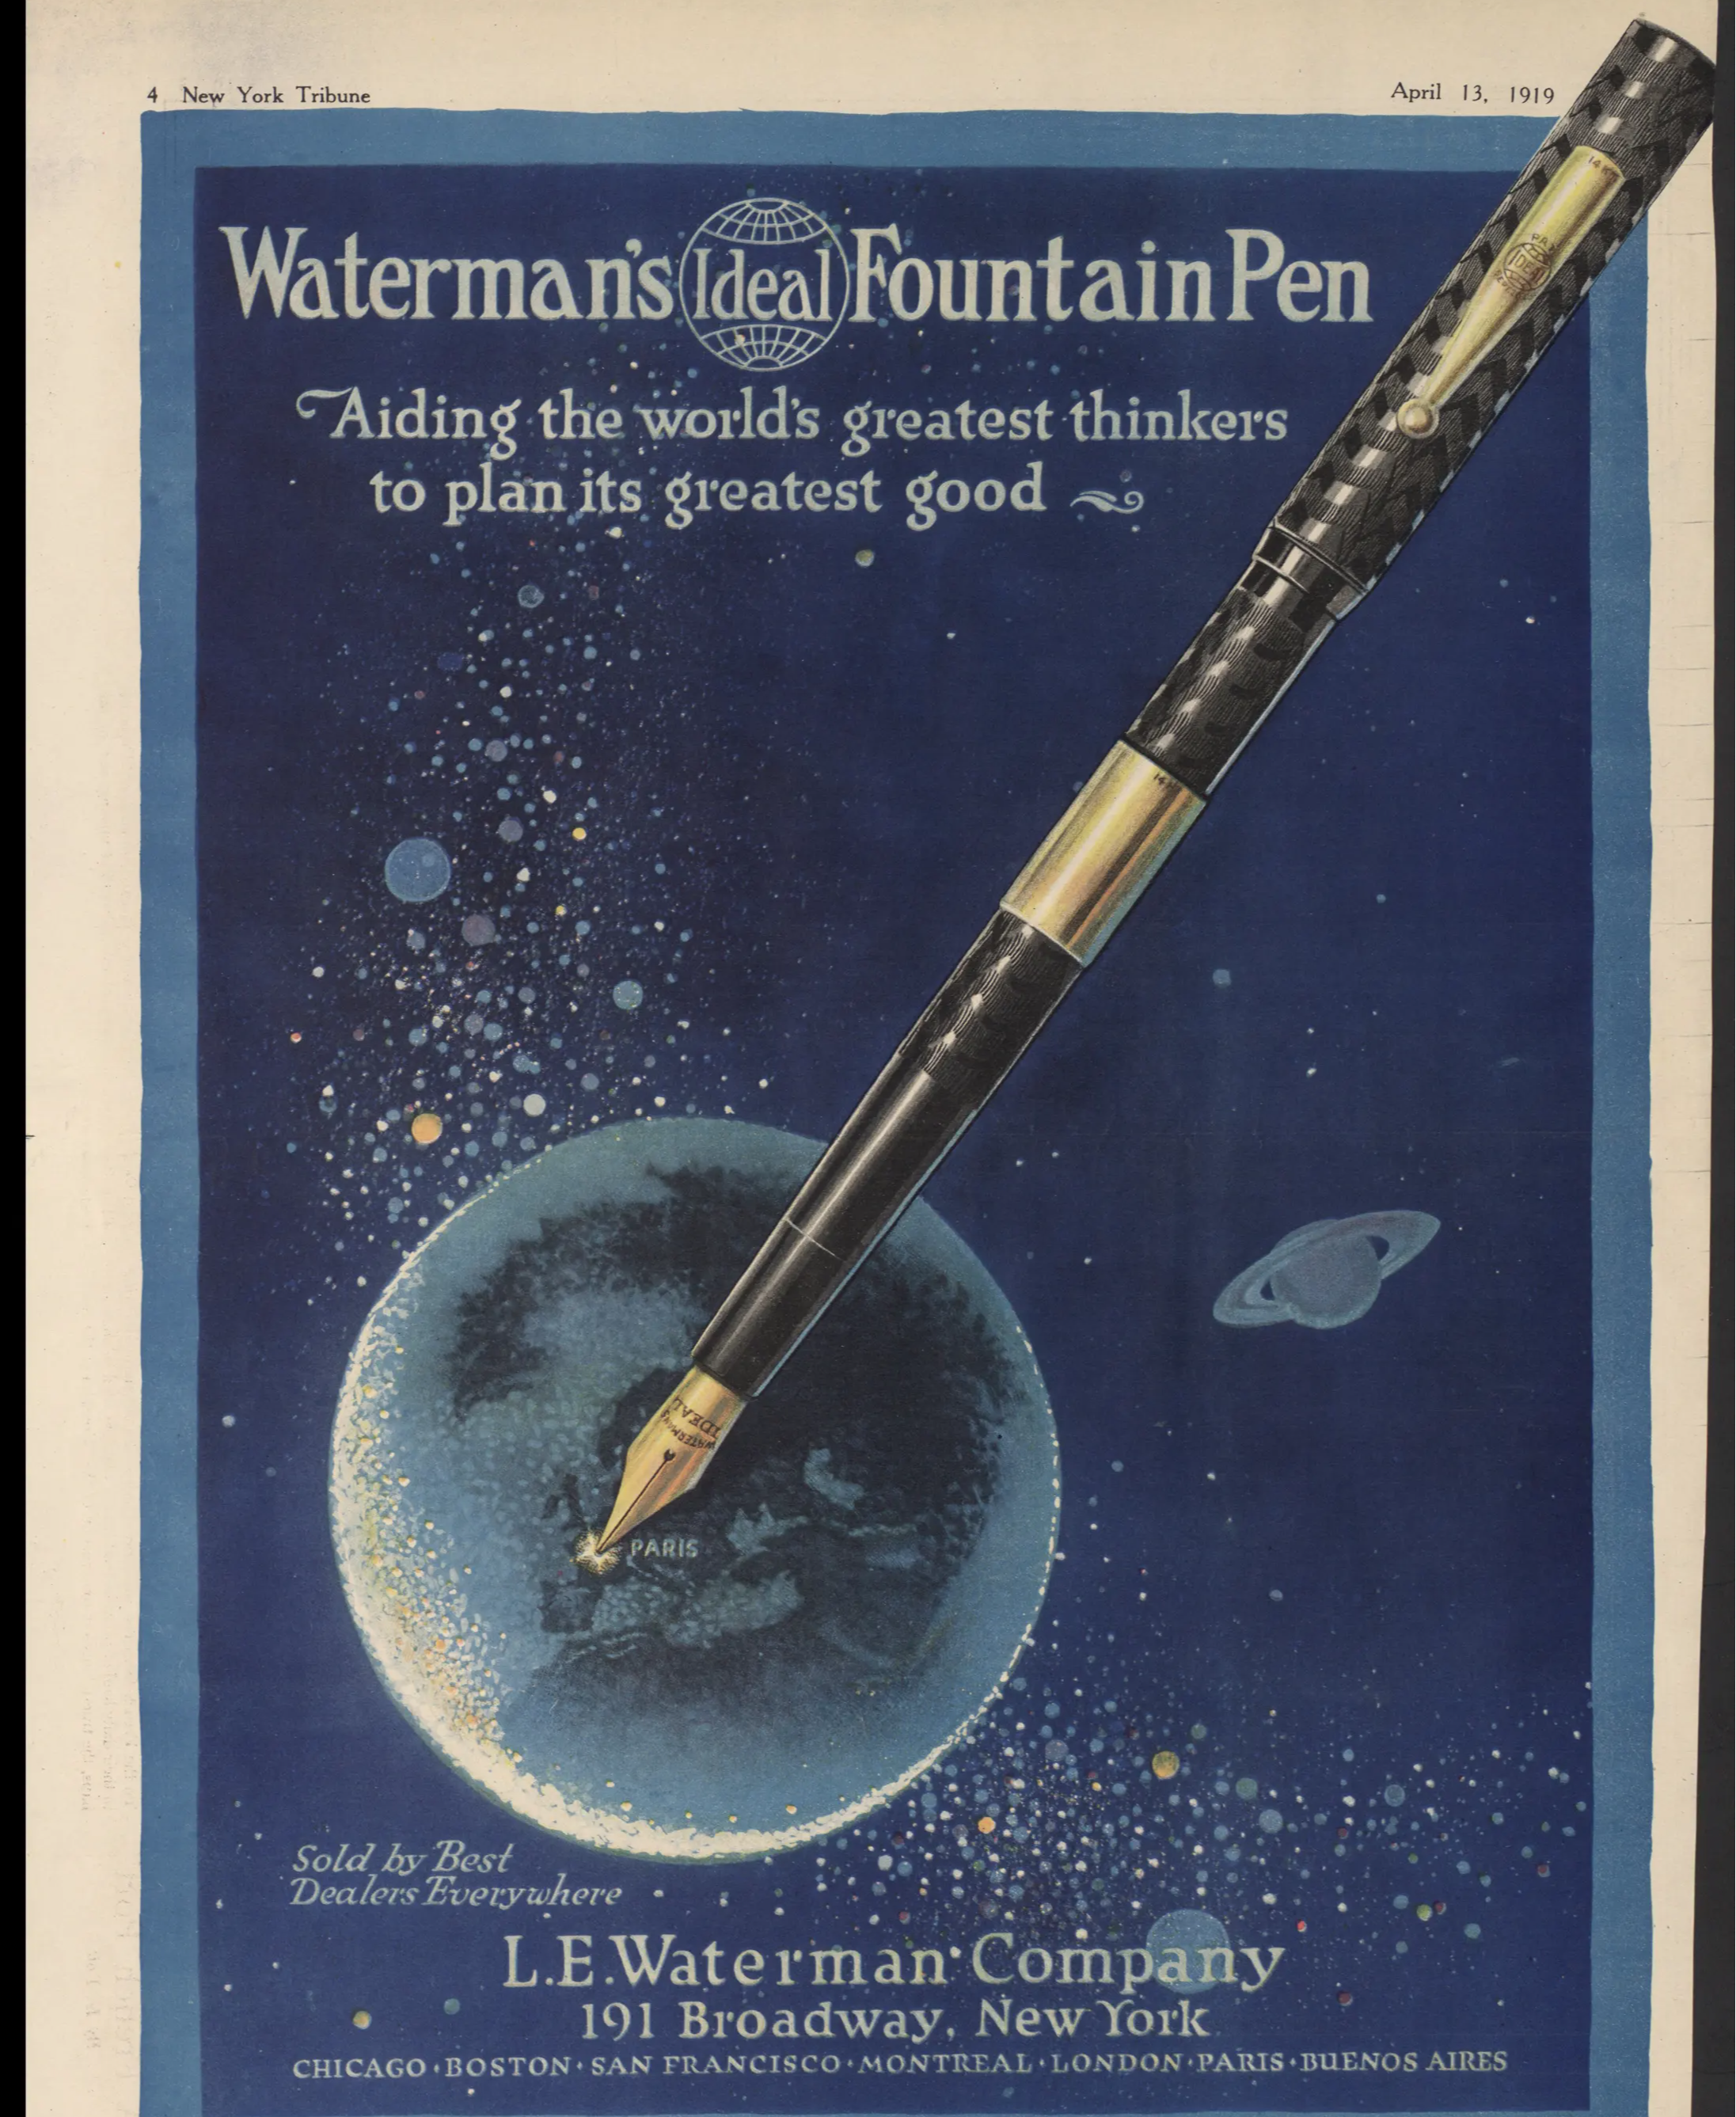 Who Invented the Fountain Pen?